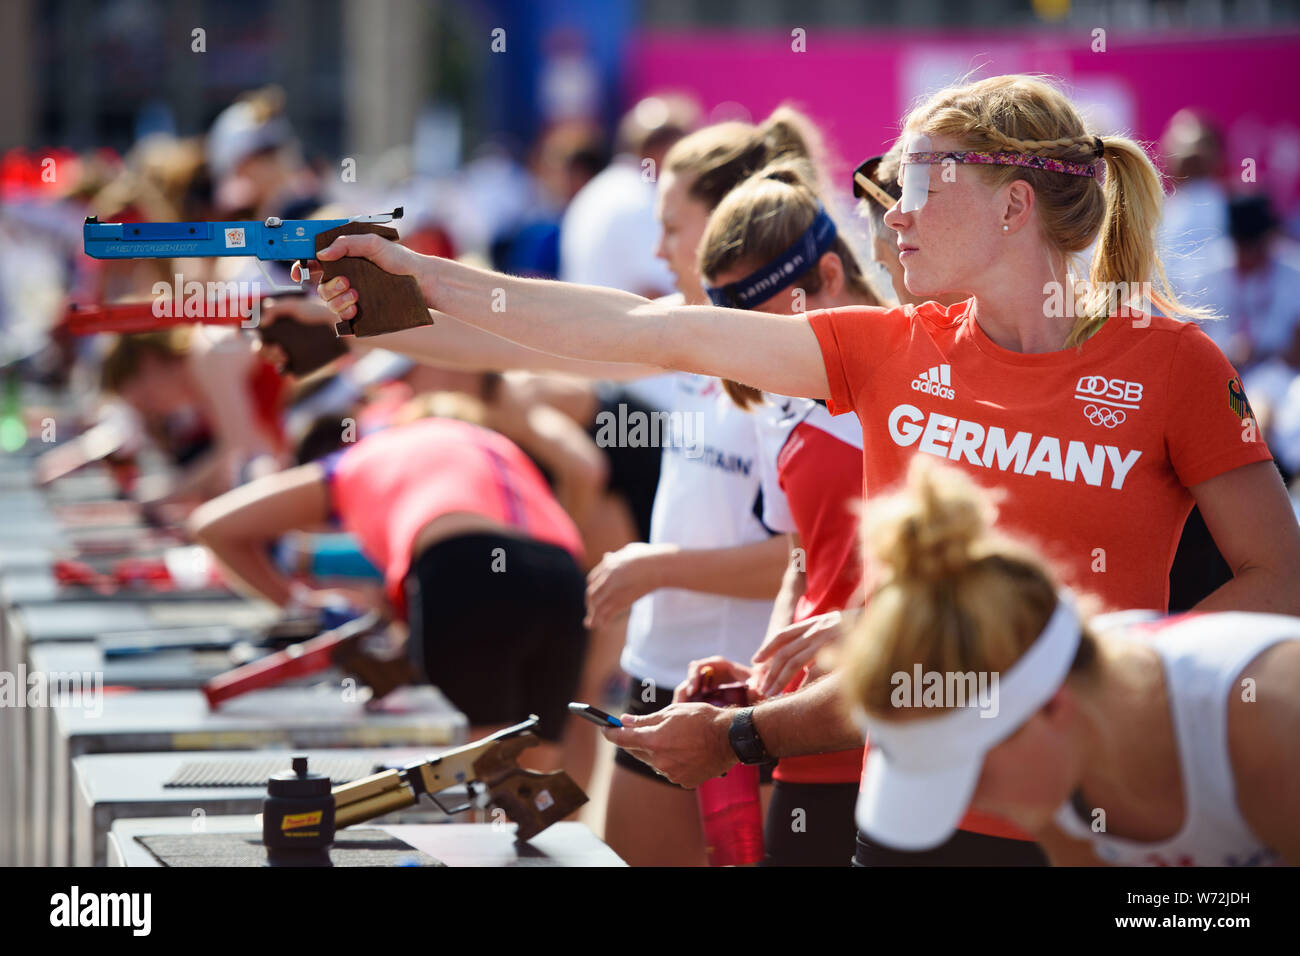 Berlin, Germany. 04th Aug, 2019. Modern pentathlon: German Championship, Laser  Run, Olympic Place. Annika Schleu targets a target with her laser pistol in  her hand during the warm-up phase. Credit: Gregor Fischer/dpa/Alamy